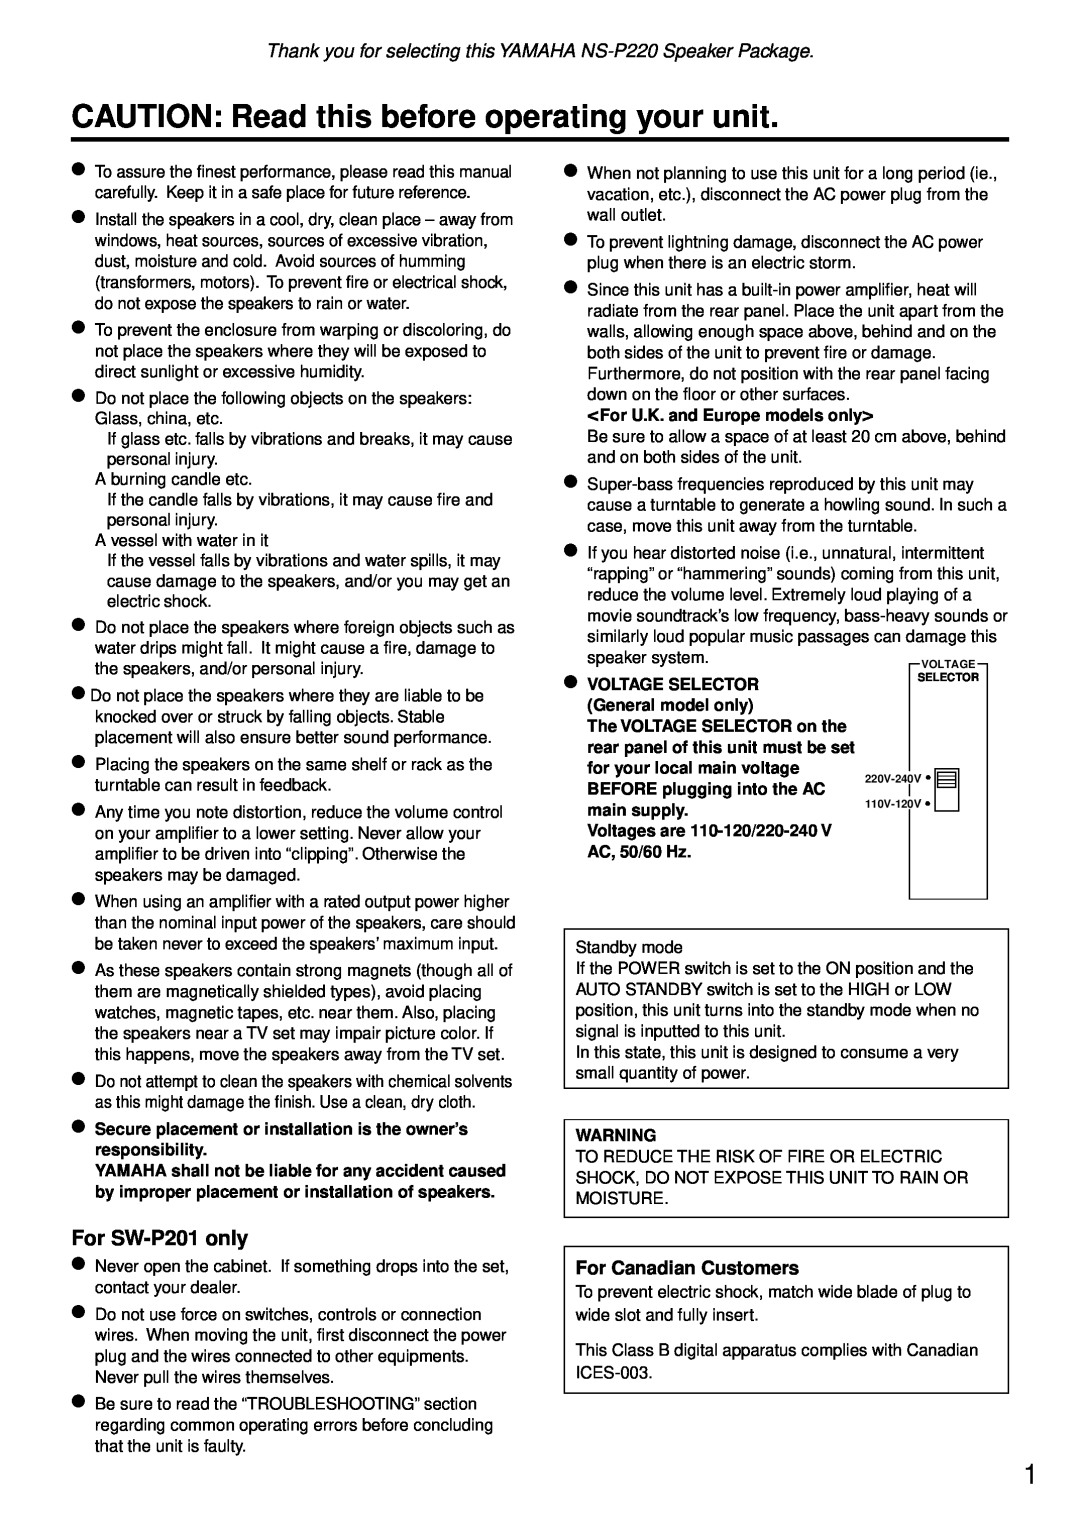 Yamaha NS-P220 CAUTION Read this before operating your unit, For Canadian Customers, For U.K. and Europe models only 